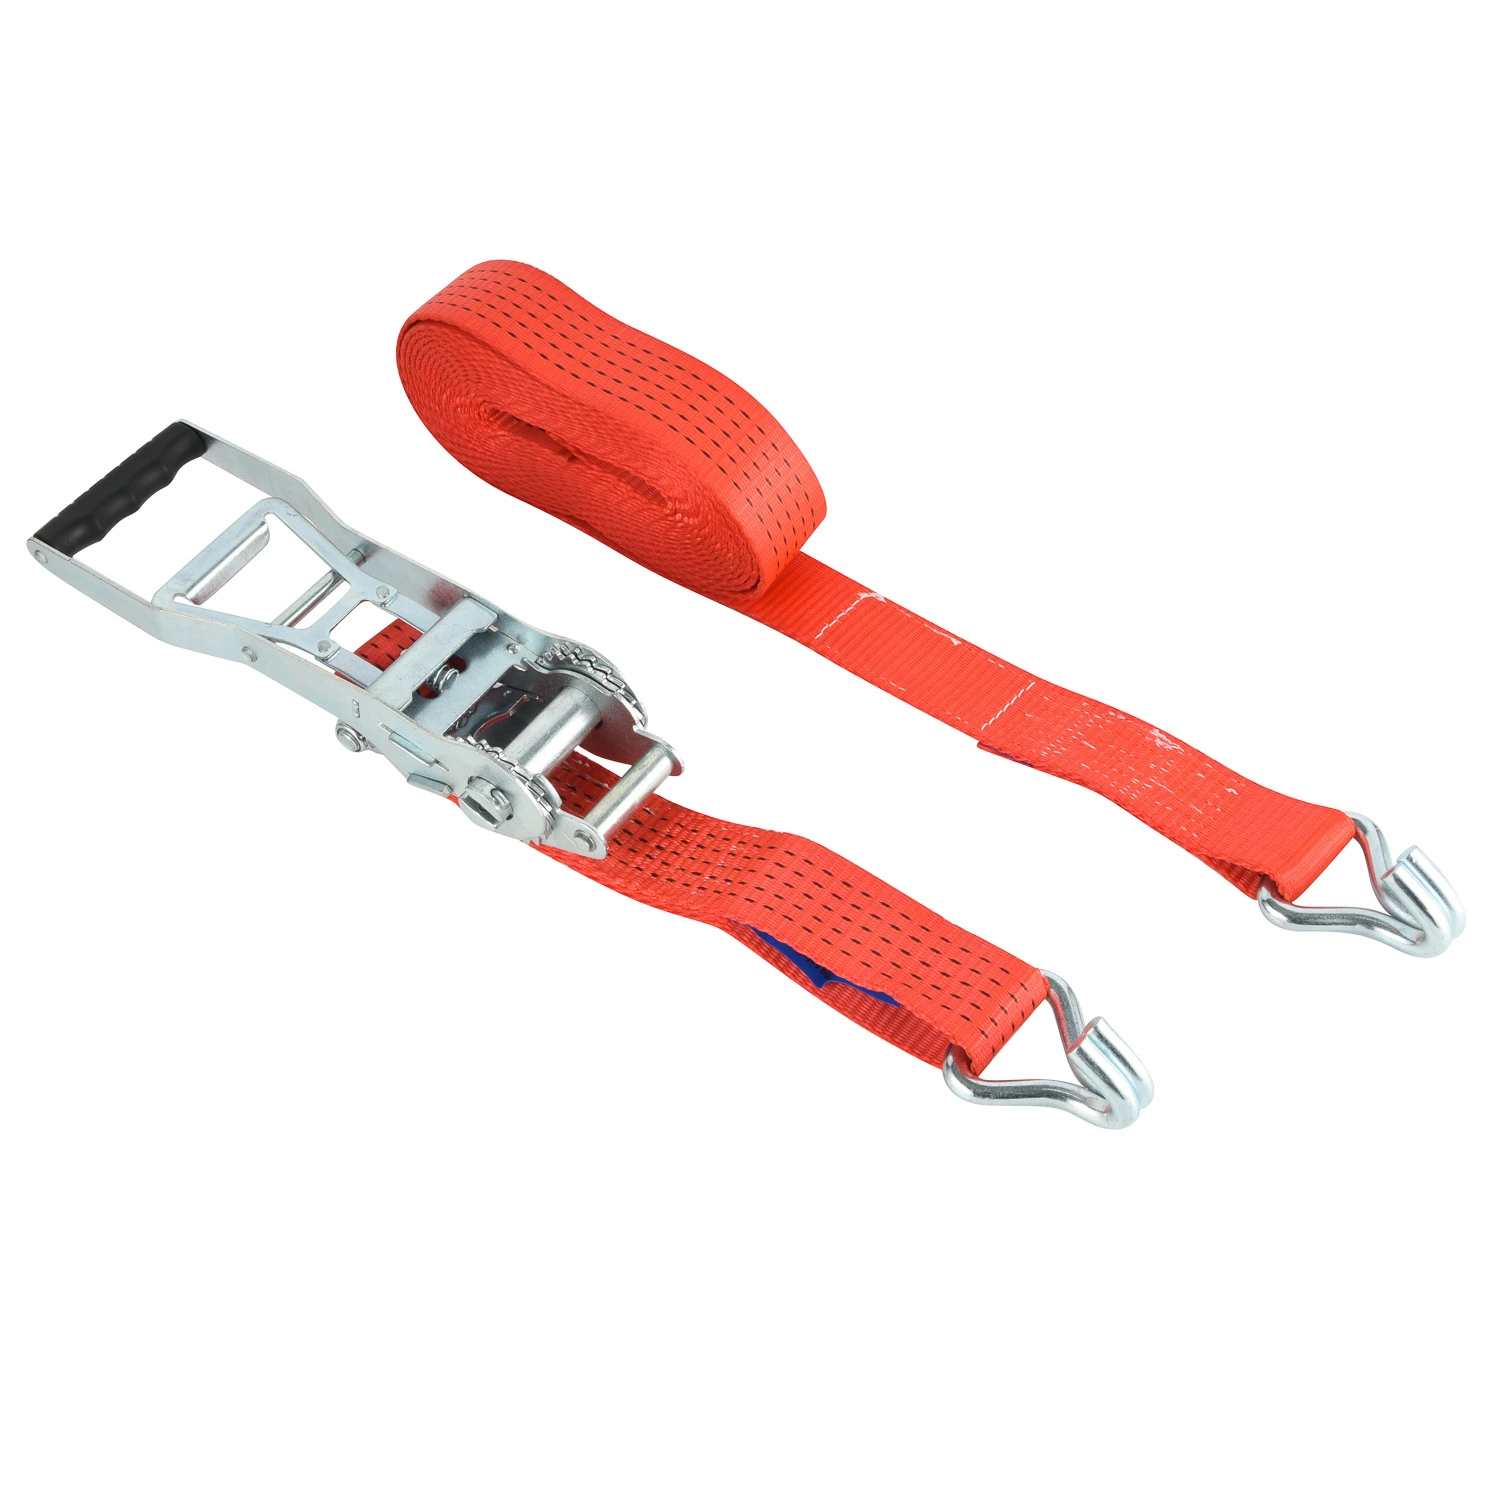 2 Inch 50mm 5000kg Reverse/Ergo Ratchet Straps with Double J Hook